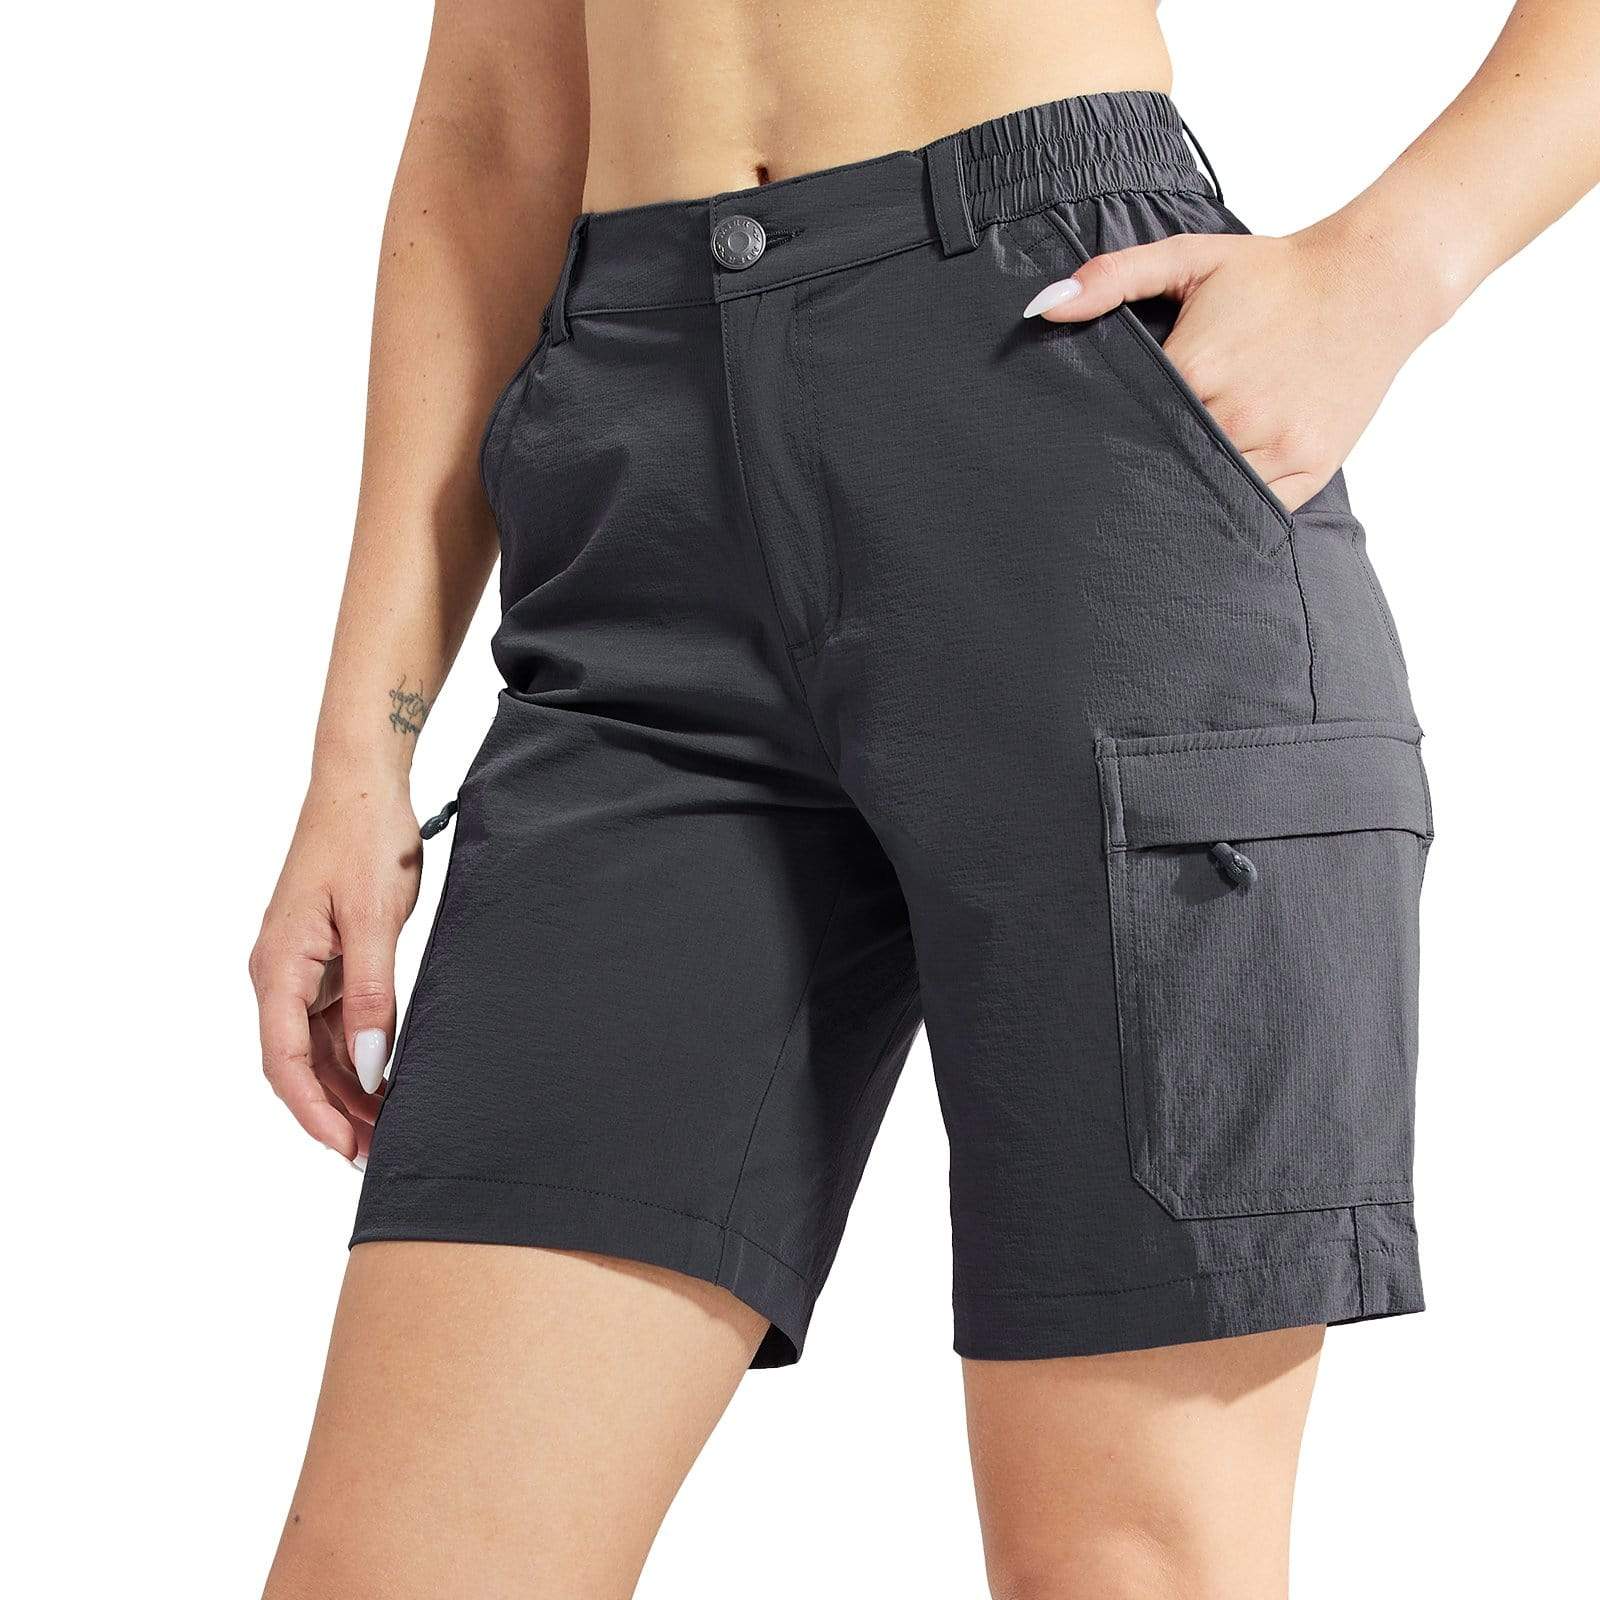 Women's Stretchy Hiking Shorts Quick Dry Cargo Shorts - Graphite Grey / 2